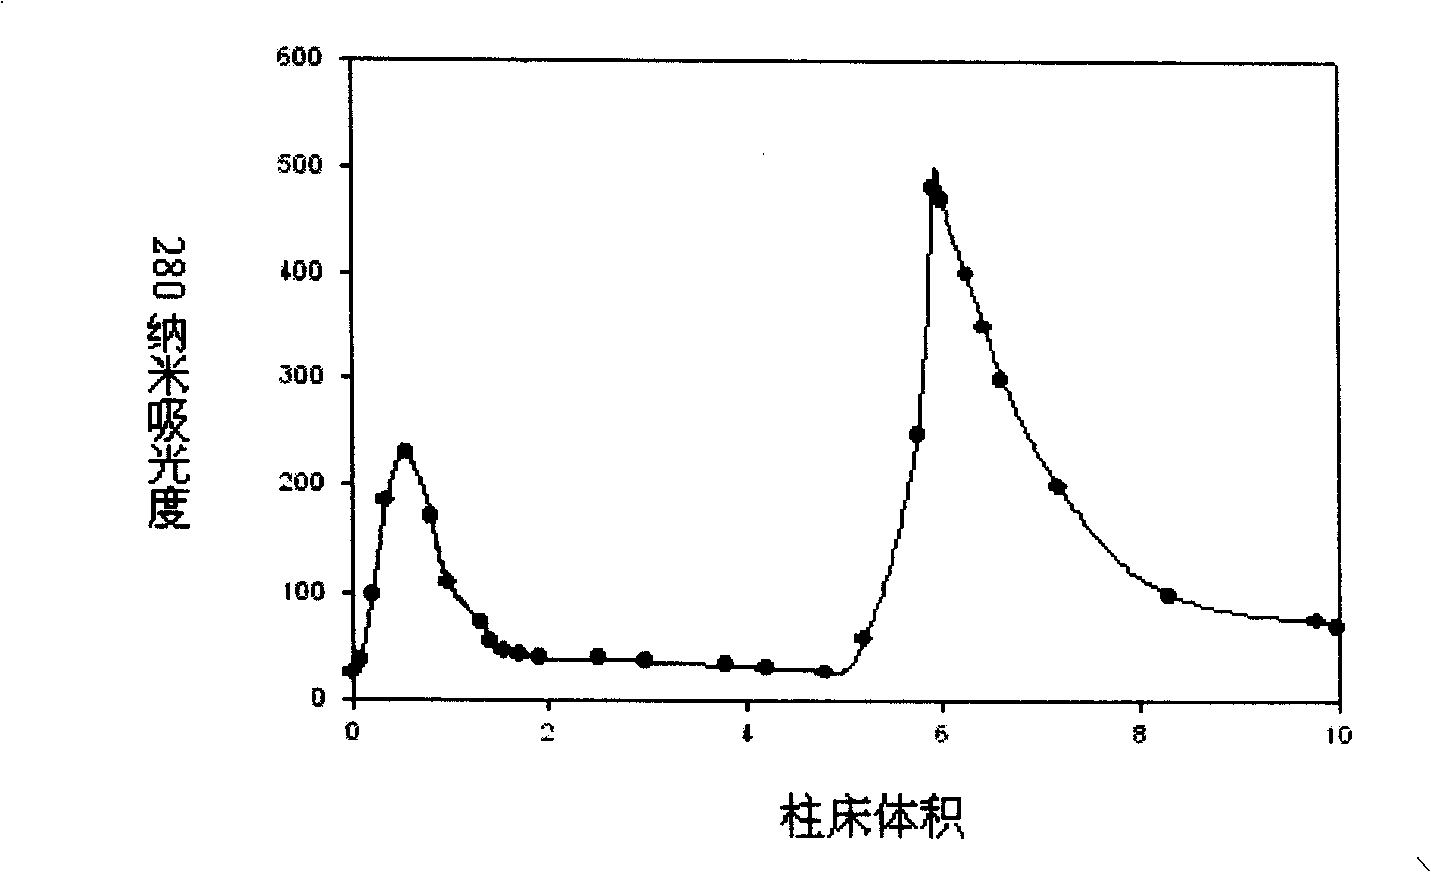 Purifying and producing process for high purity follicle stimulating hormone in urine